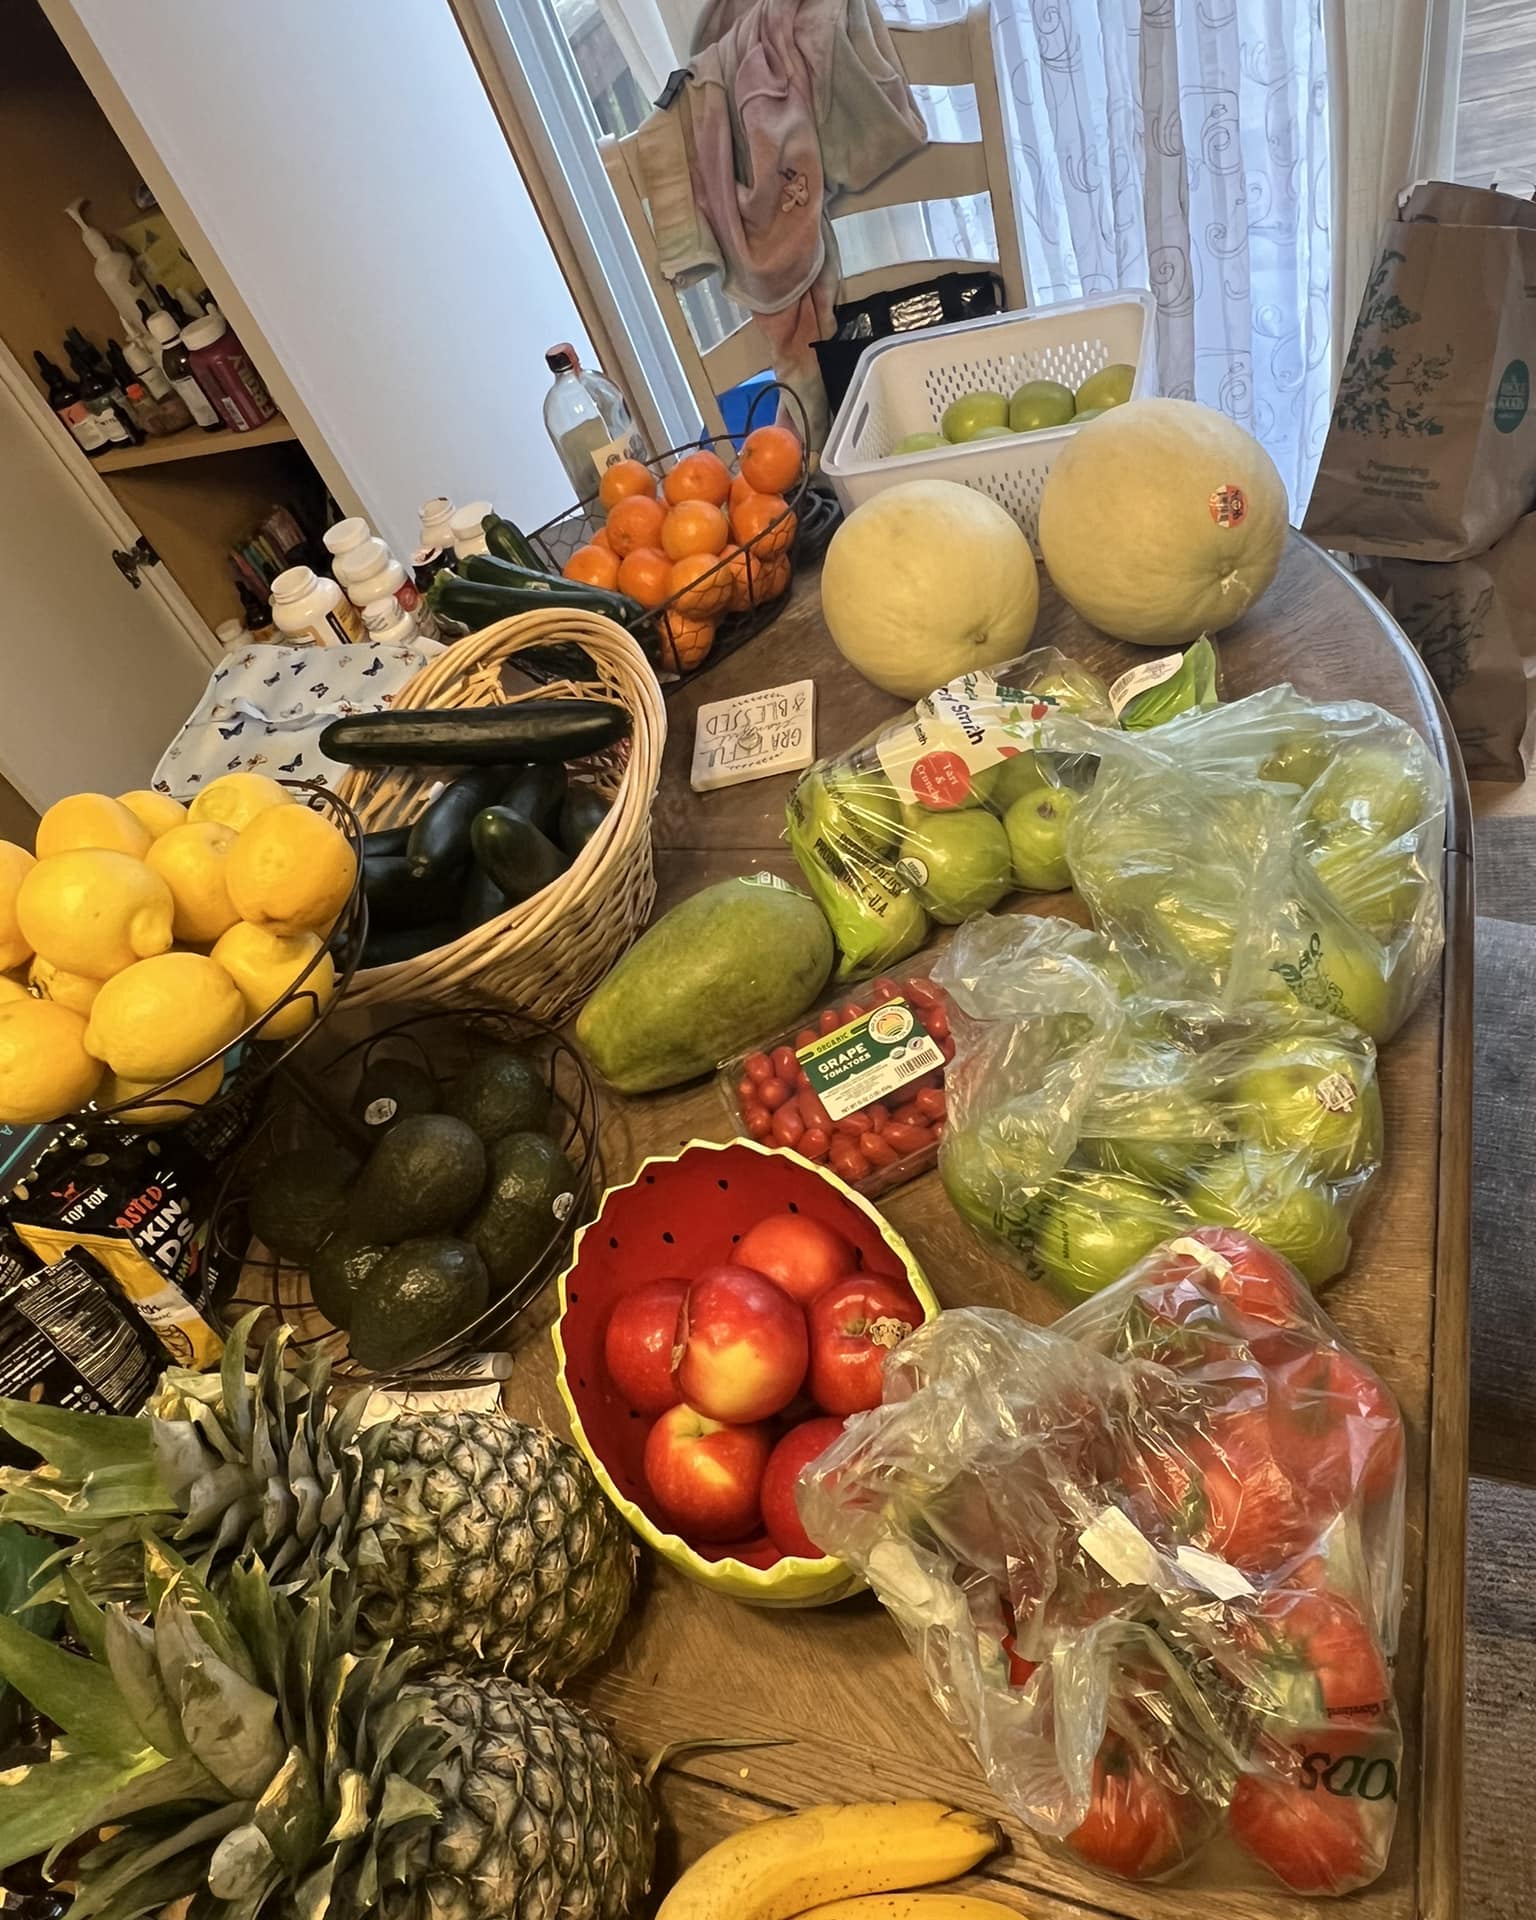 Typically what my fruit haul looks like except I didn’t find watermelons or grapes.
Everyday favorites cucumbers tomatoes avocados
Juicing everyday favorites apples lemon pineapples oranges and sometimes honeydew 🫶🏻🦋🌈☀️🍉🍏